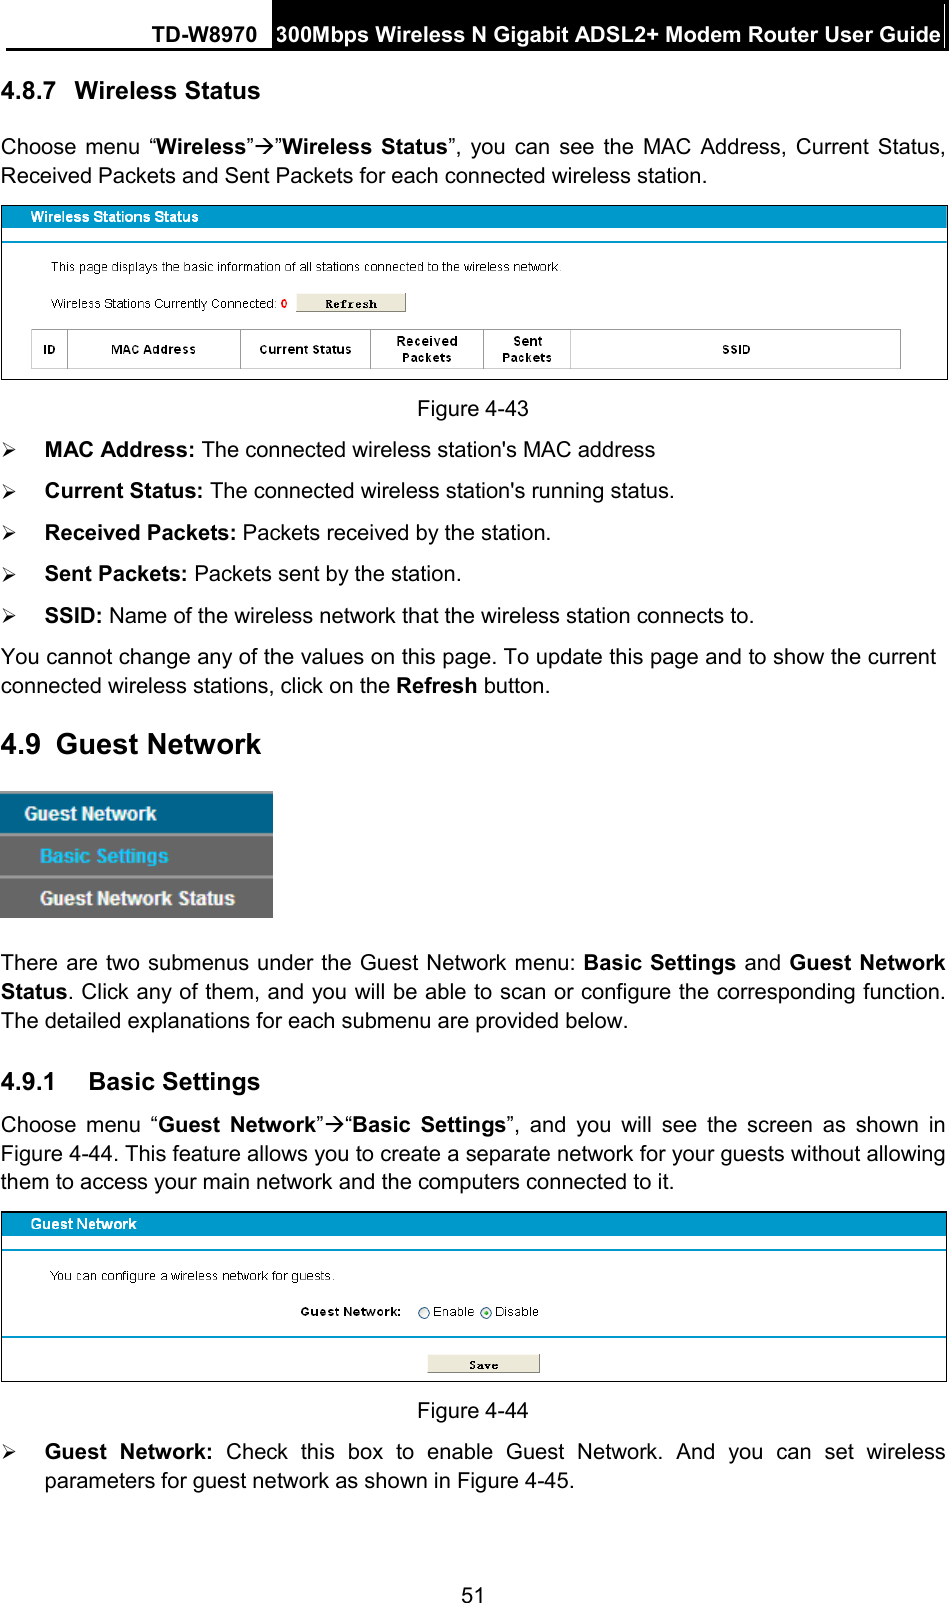 TD-W8970 300Mbps Wireless N Gigabit ADSL2+ Modem Router User Guide  4.8.7 Wireless Status Choose menu “Wireless””Wireless  Status”, you can see the MAC Address, Current Status, Received Packets and Sent Packets for each connected wireless station.  Figure 4-43  MAC Address: The connected wireless station&apos;s MAC address  Current Status: The connected wireless station&apos;s running status.  Received Packets: Packets received by the station.  Sent Packets: Packets sent by the station.  SSID: Name of the wireless network that the wireless station connects to. You cannot change any of the values on this page. To update this page and to show the current connected wireless stations, click on the Refresh button.   4.9 Guest Network  There are two submenus under the Guest Network menu: Basic Settings and Guest Network Status. Click any of them, and you will be able to scan or configure the corresponding function. The detailed explanations for each submenu are provided below. 4.9.1 Basic Settings   Choose menu “Guest Network”“Basic Settings”, and you will see the screen as shown in Figure 4-44. This feature allows you to create a separate network for your guests without allowing them to access your main network and the computers connected to it.     Figure 4-44  Guest Network:  Check this box to enable Guest Network.  And  you can set wireless parameters for guest network as shown in Figure 4-45. 51 